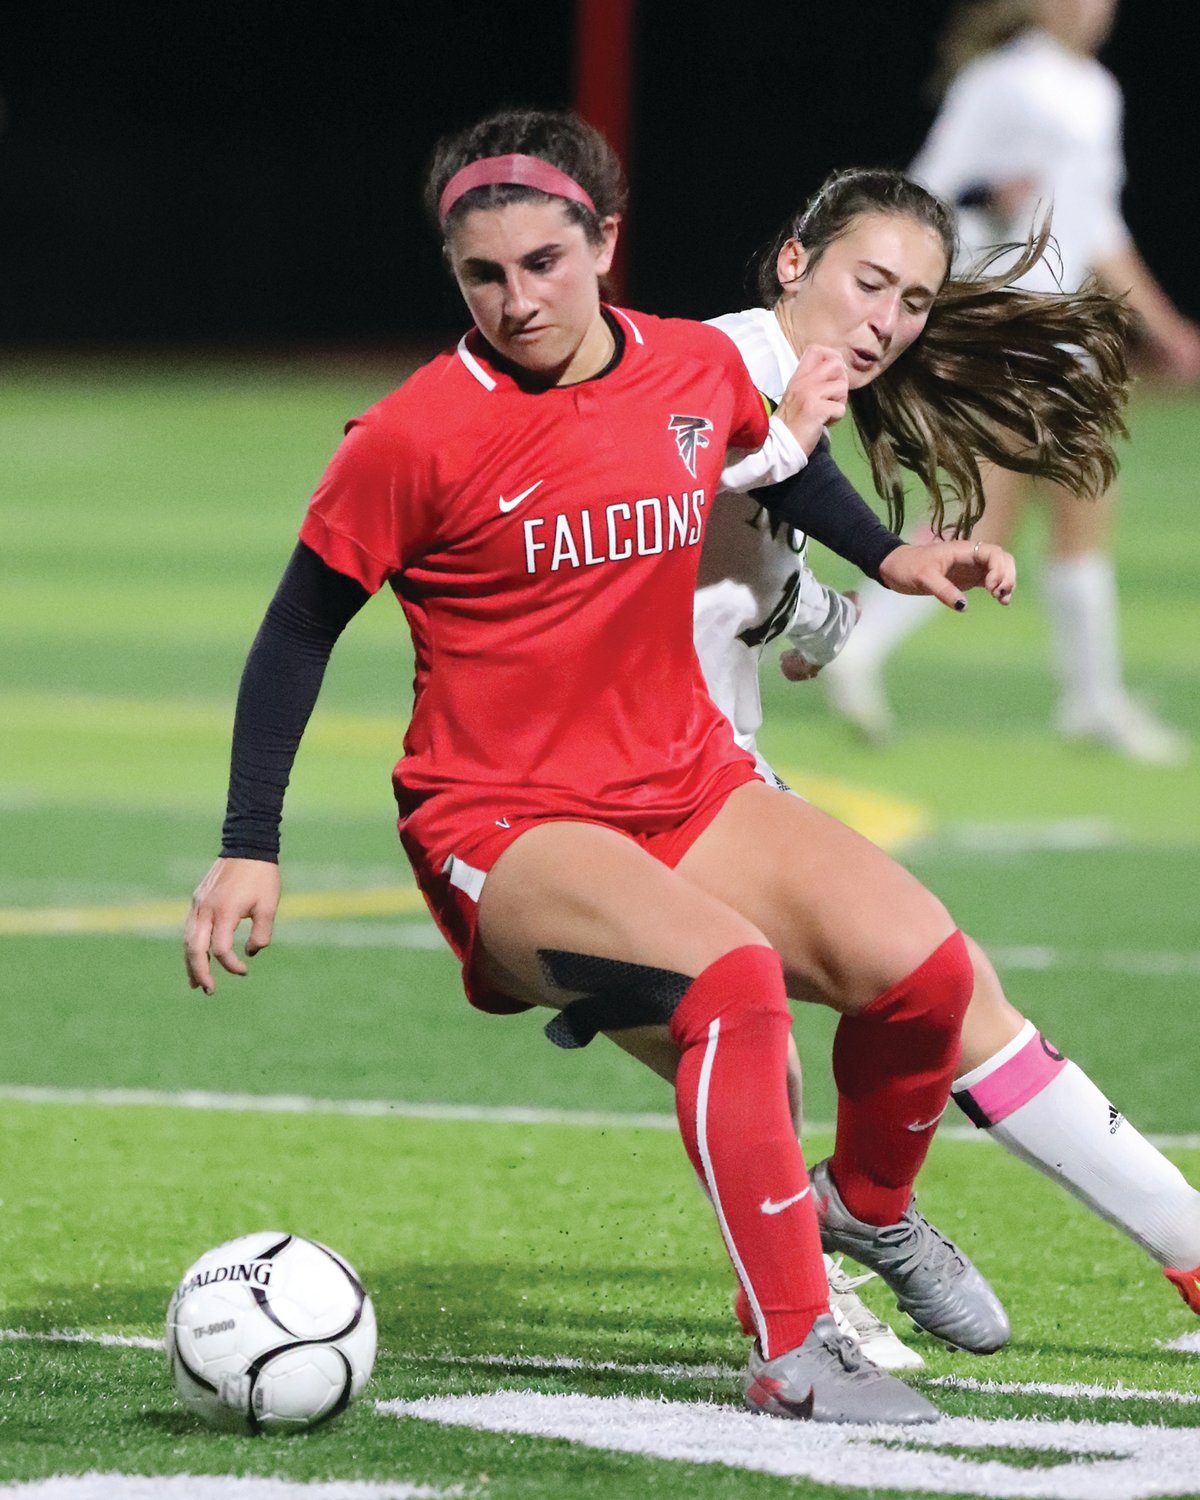 FIGHTING FOR THE BALL: Maddie Alves battles for the ball.